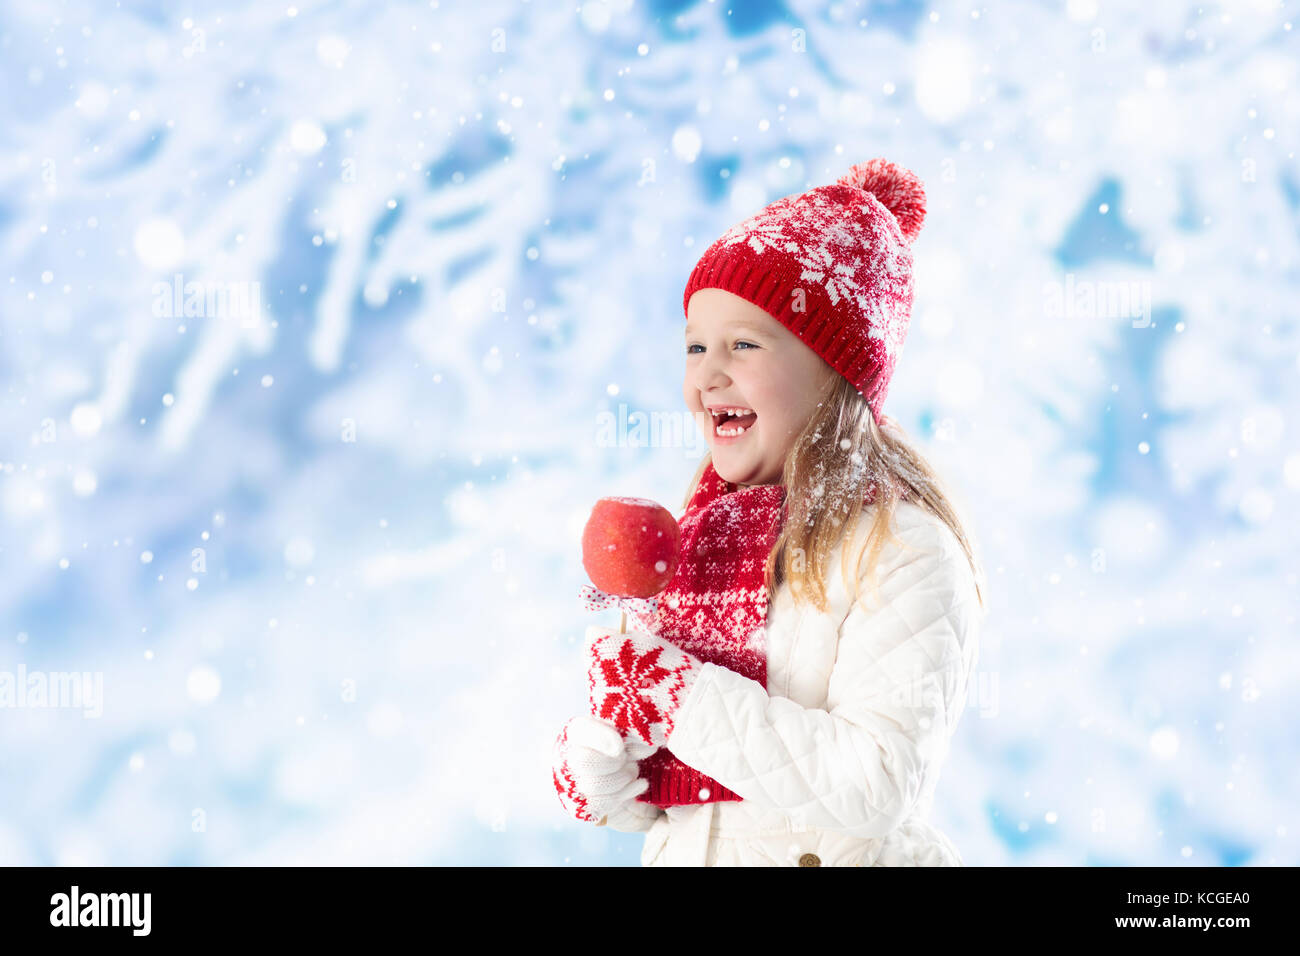 Child eating candy apple on winter fair. Kids eat toffee apples on Christmas market in snow. Outdoor fun on snowy day. Family vacation in Xmas season. Stock Photo